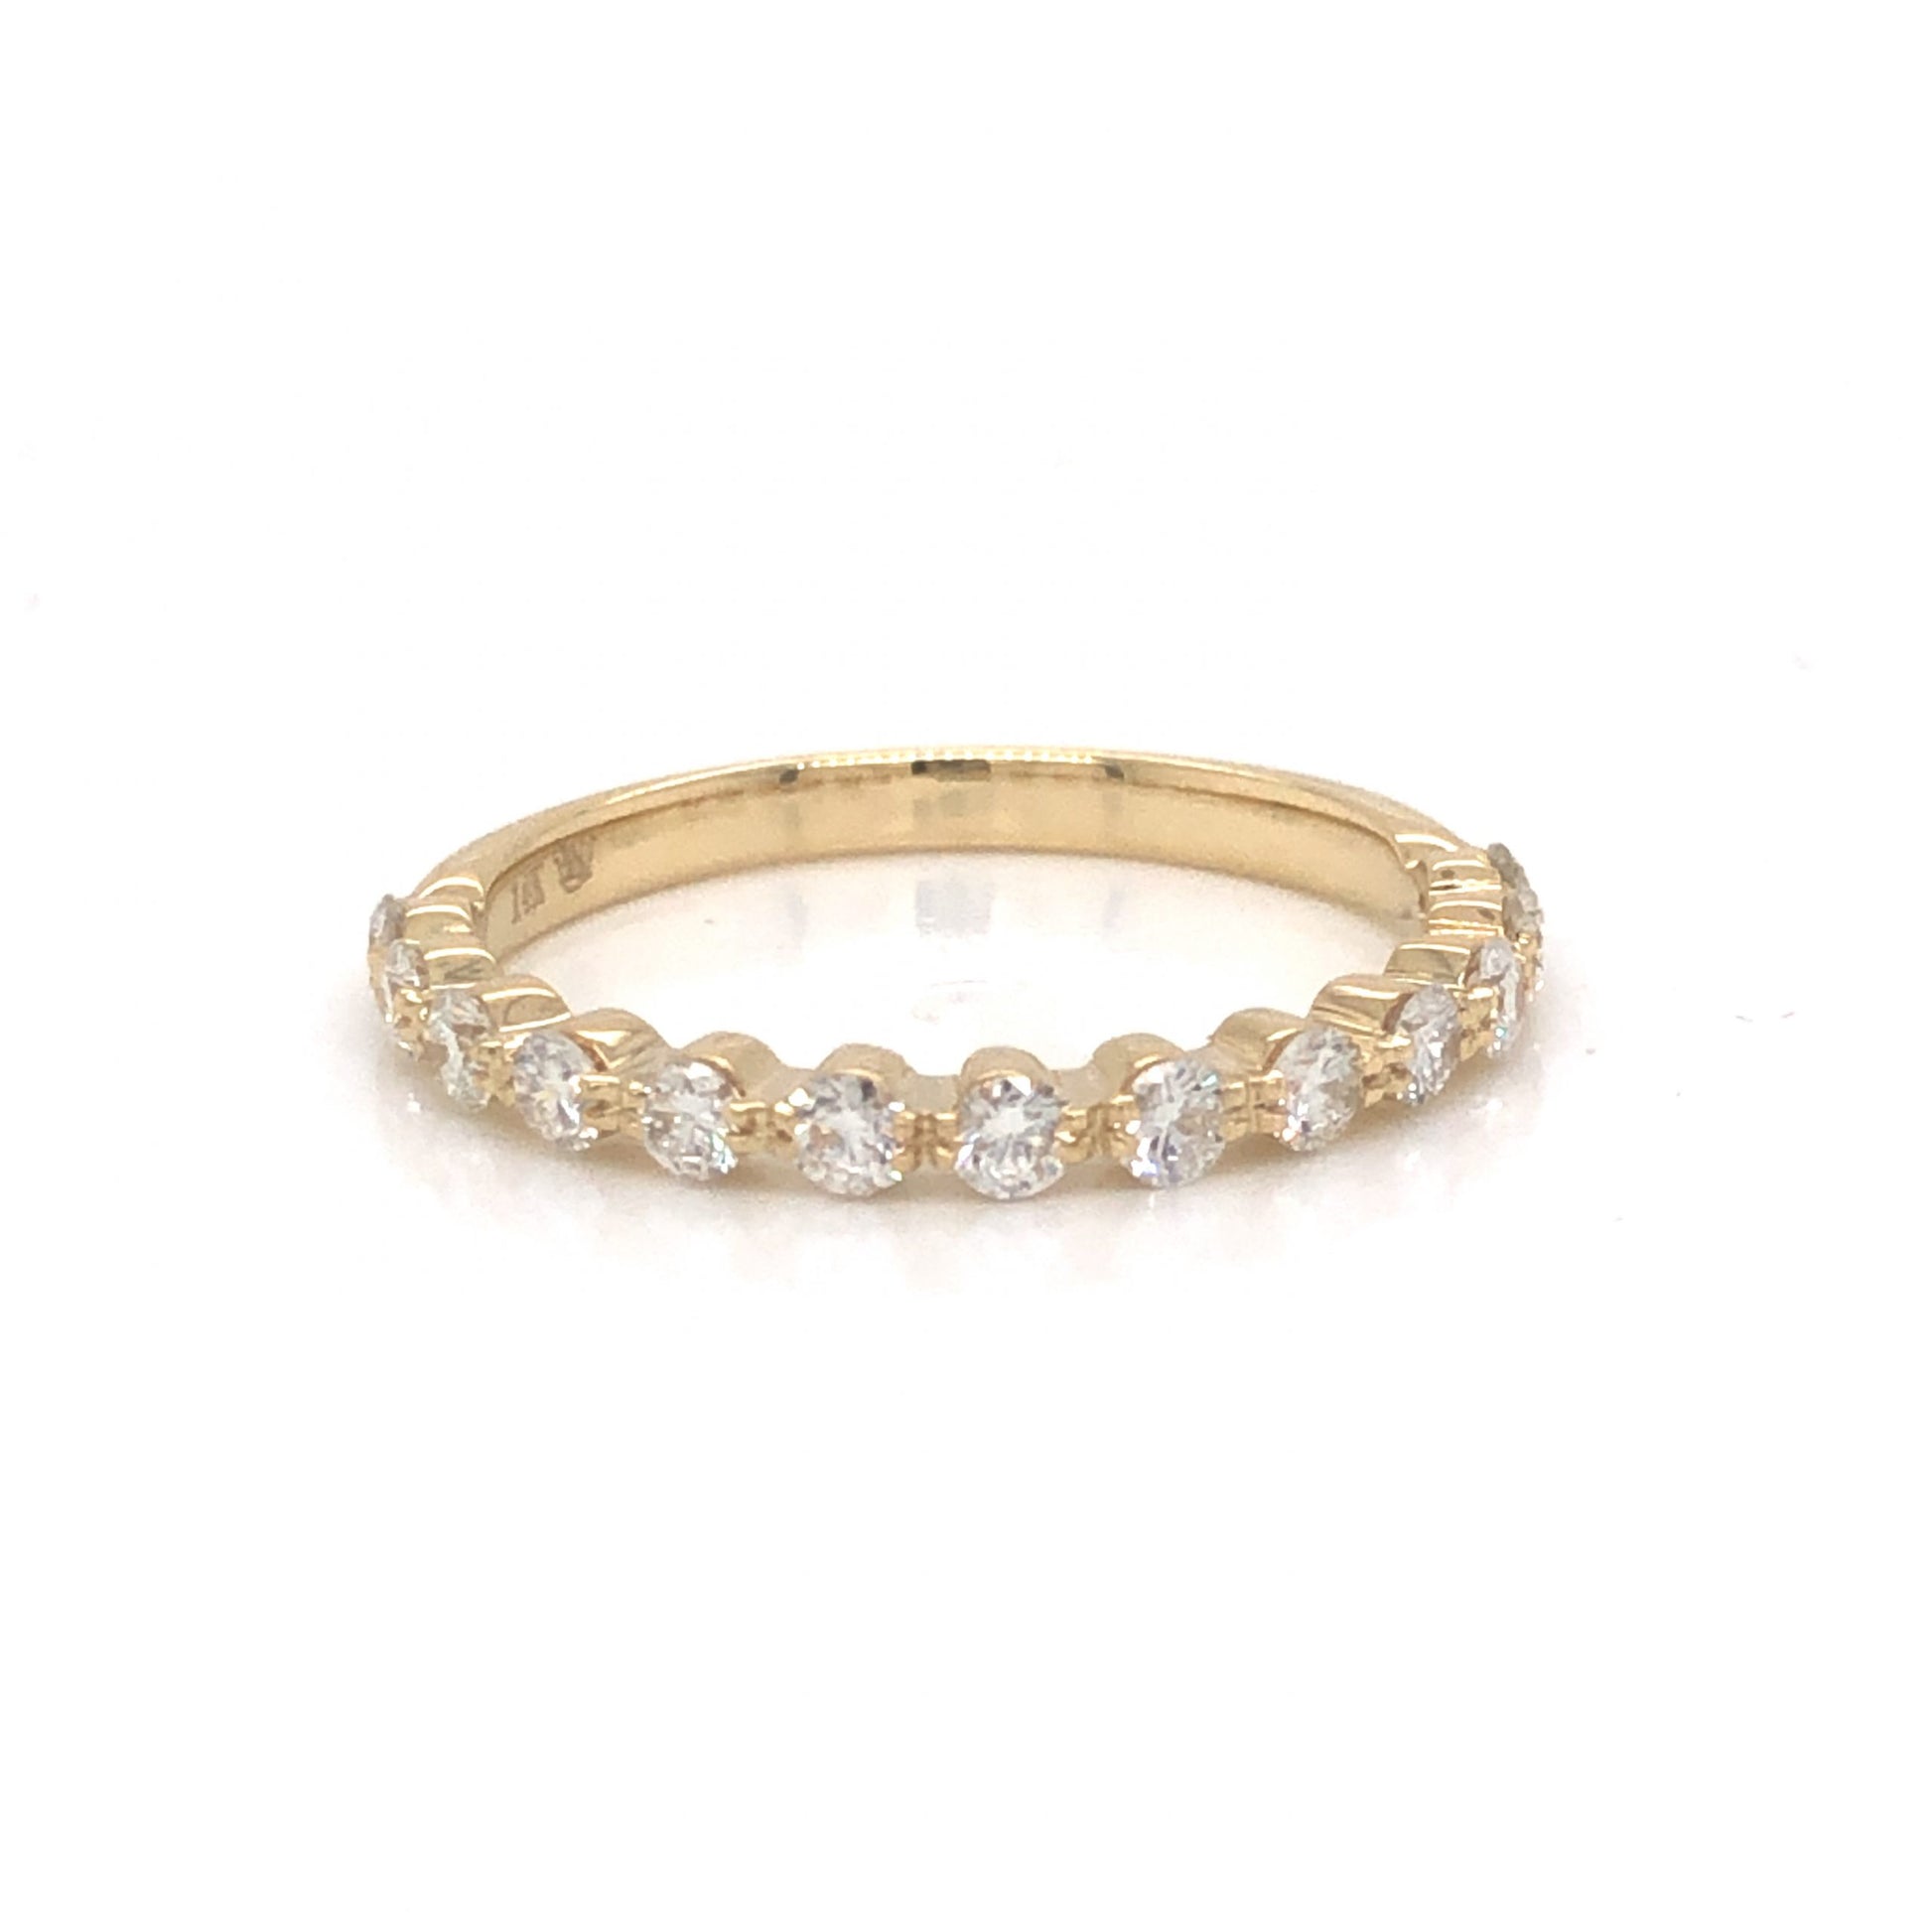 .53 Round Diamond Wedding Band in 14k Yellow GoldComposition: Platinum Ring Size: 6.5 Total Diamond Weight: .53ct Total Gram Weight: 1.5 g Inscription: 14k
      